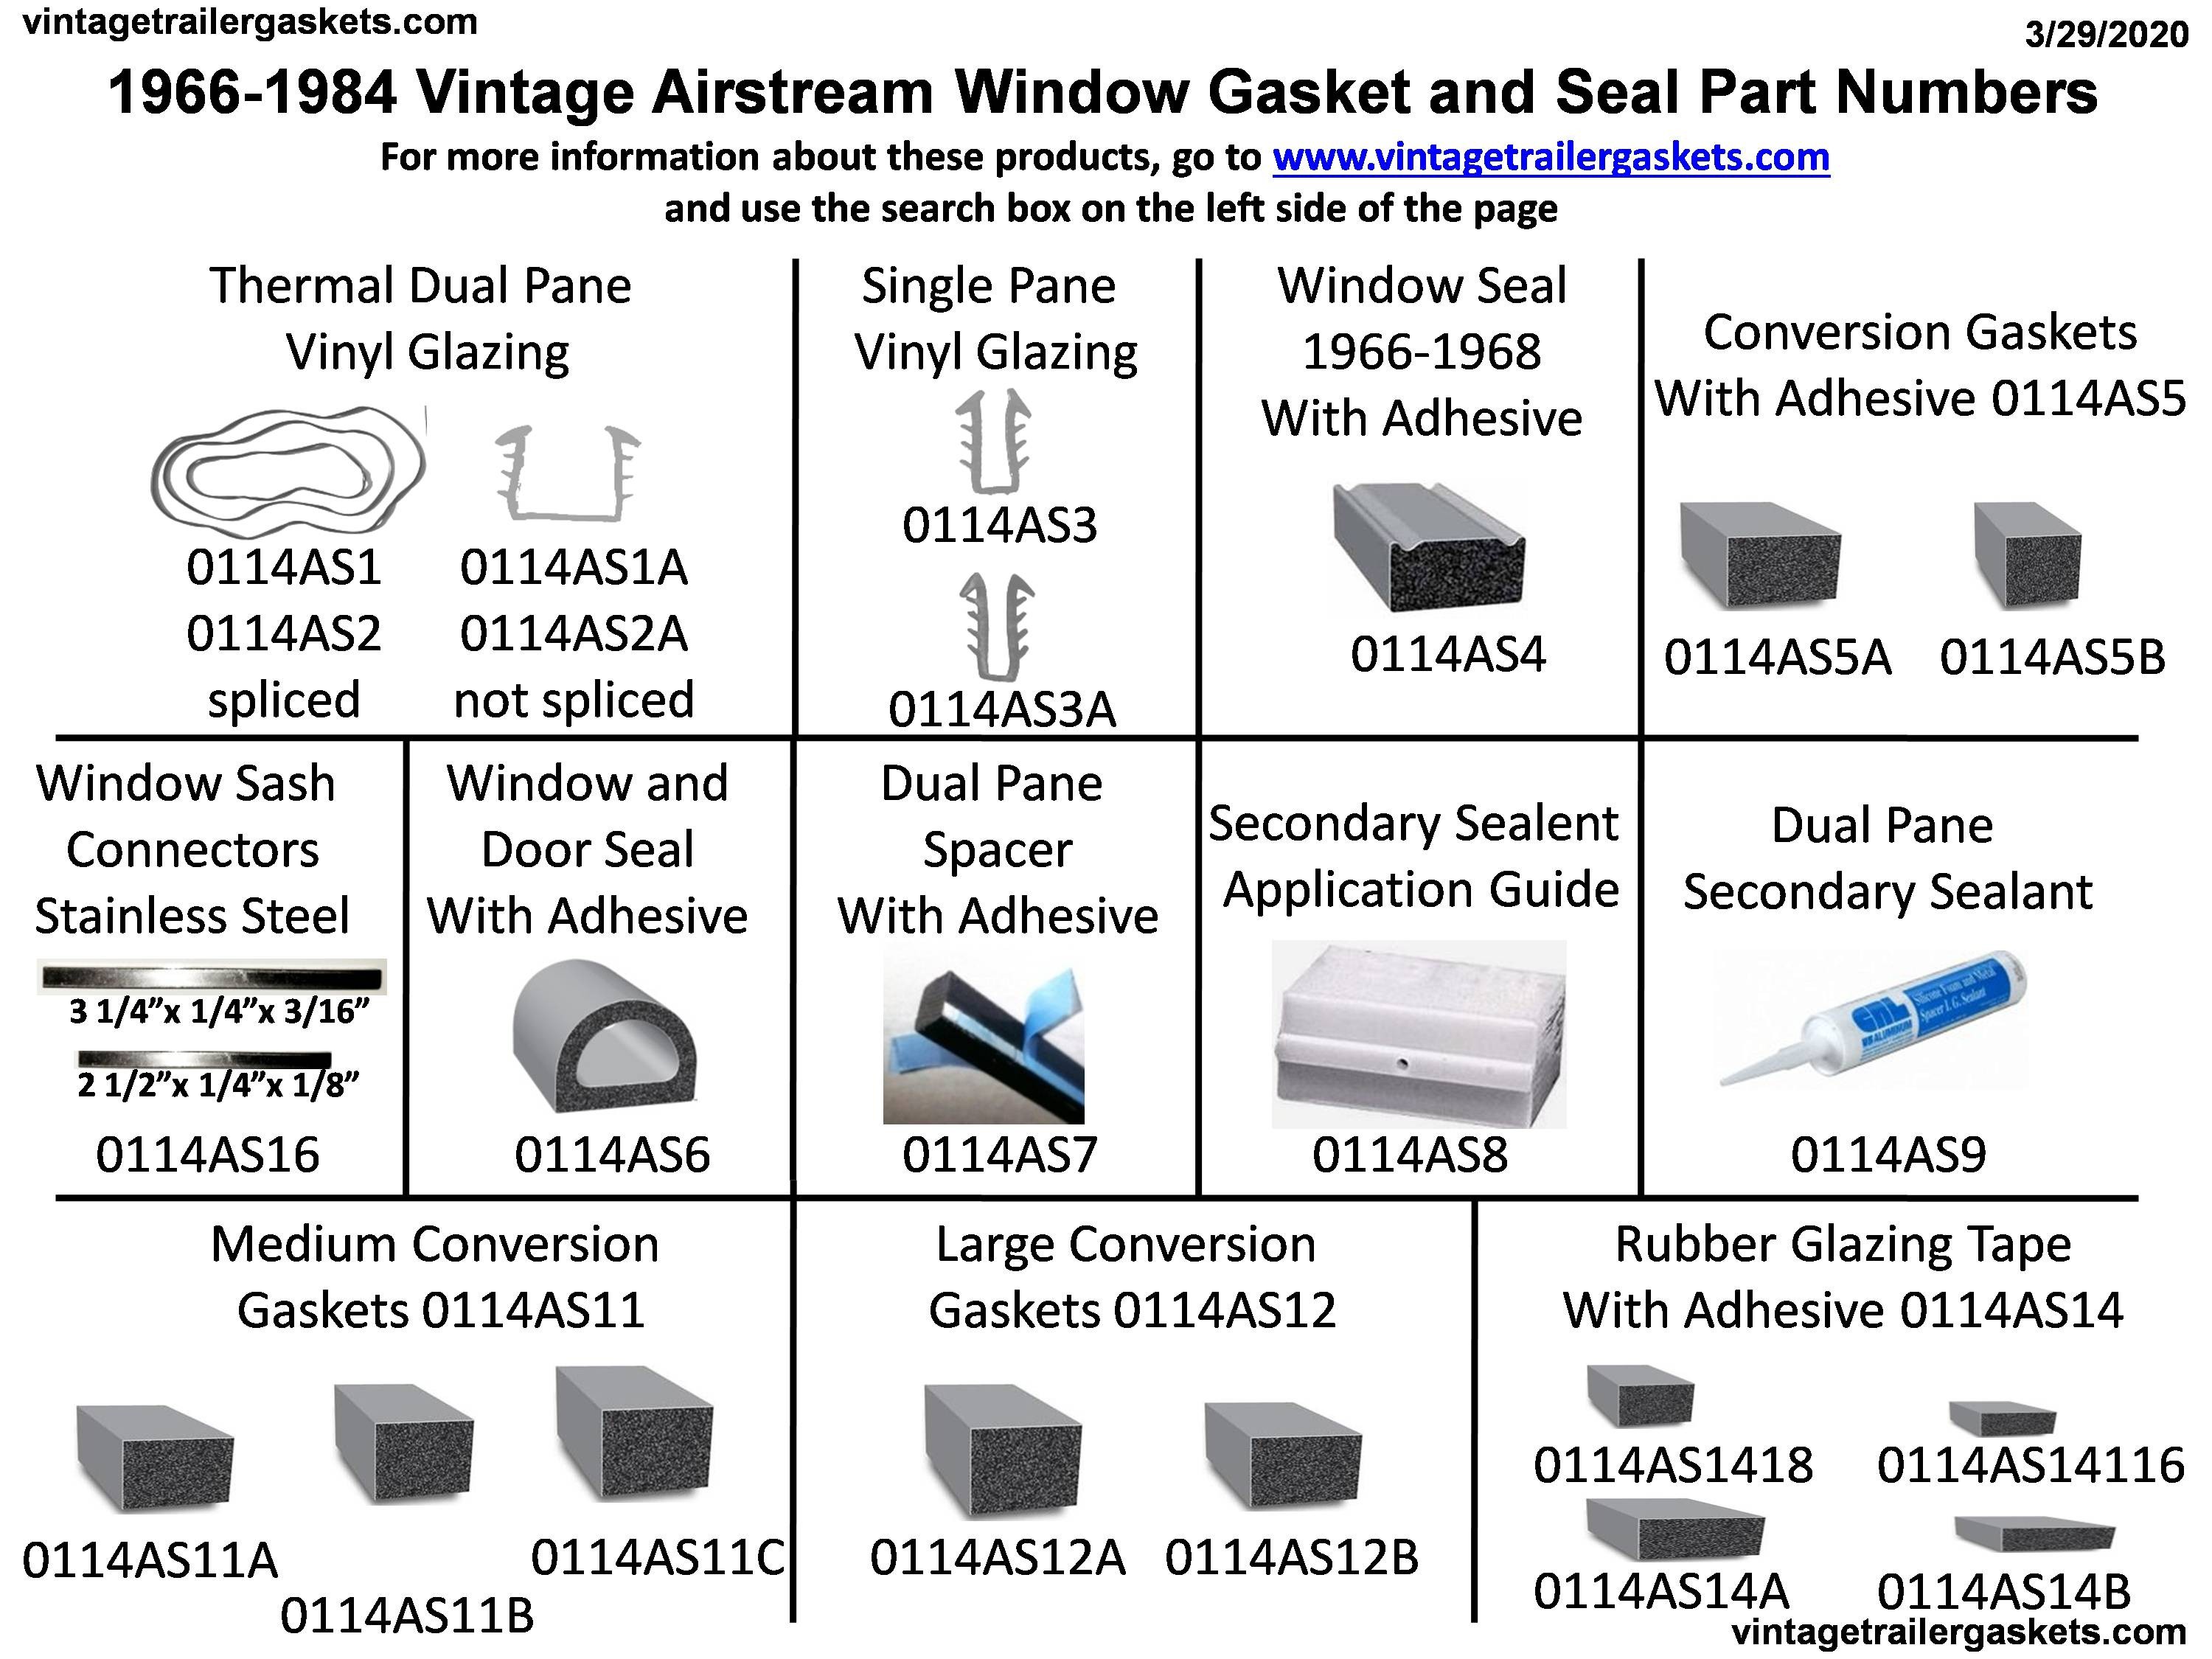 1966 to 1984 Airstream Window Gaskets and Seals